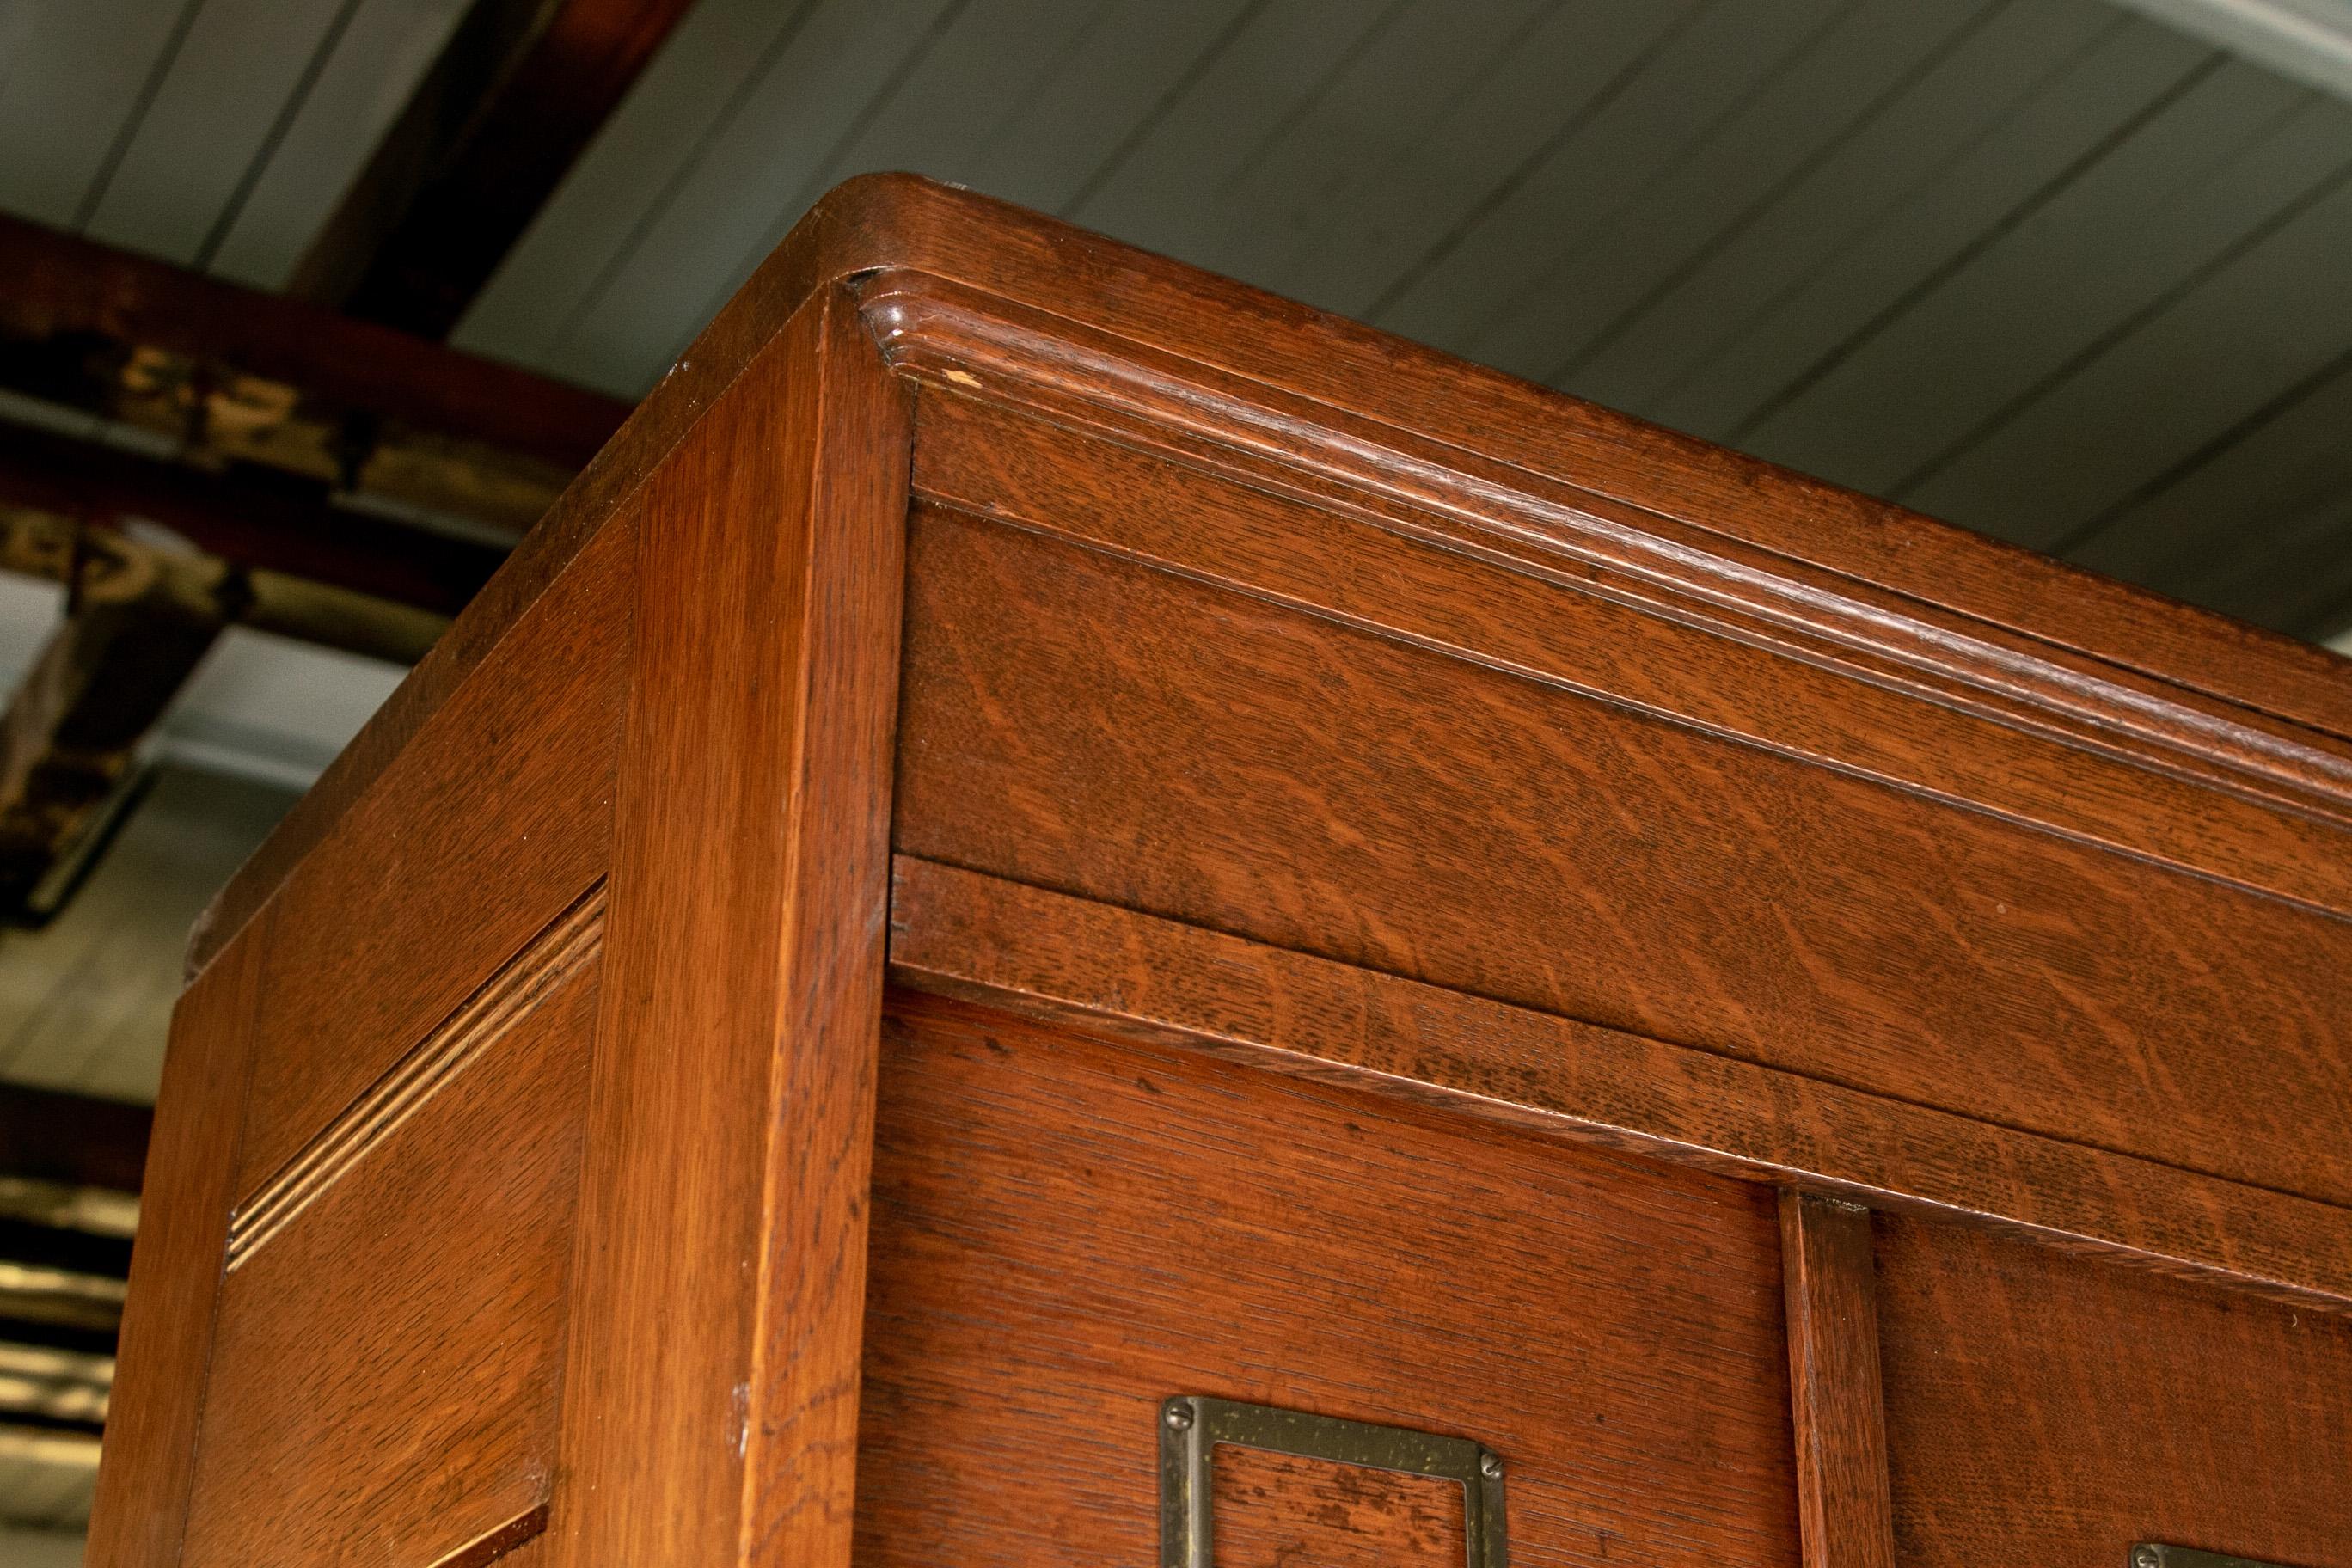 The M. Ohmer’s Sons Co. [Dayton, OH] cabinet file, oak, rectangular form with inset paneled sides, top portion with two vertical rows each with 12 upward sliding doors that open to reveal storage compartments. The lower portion with seven stacked